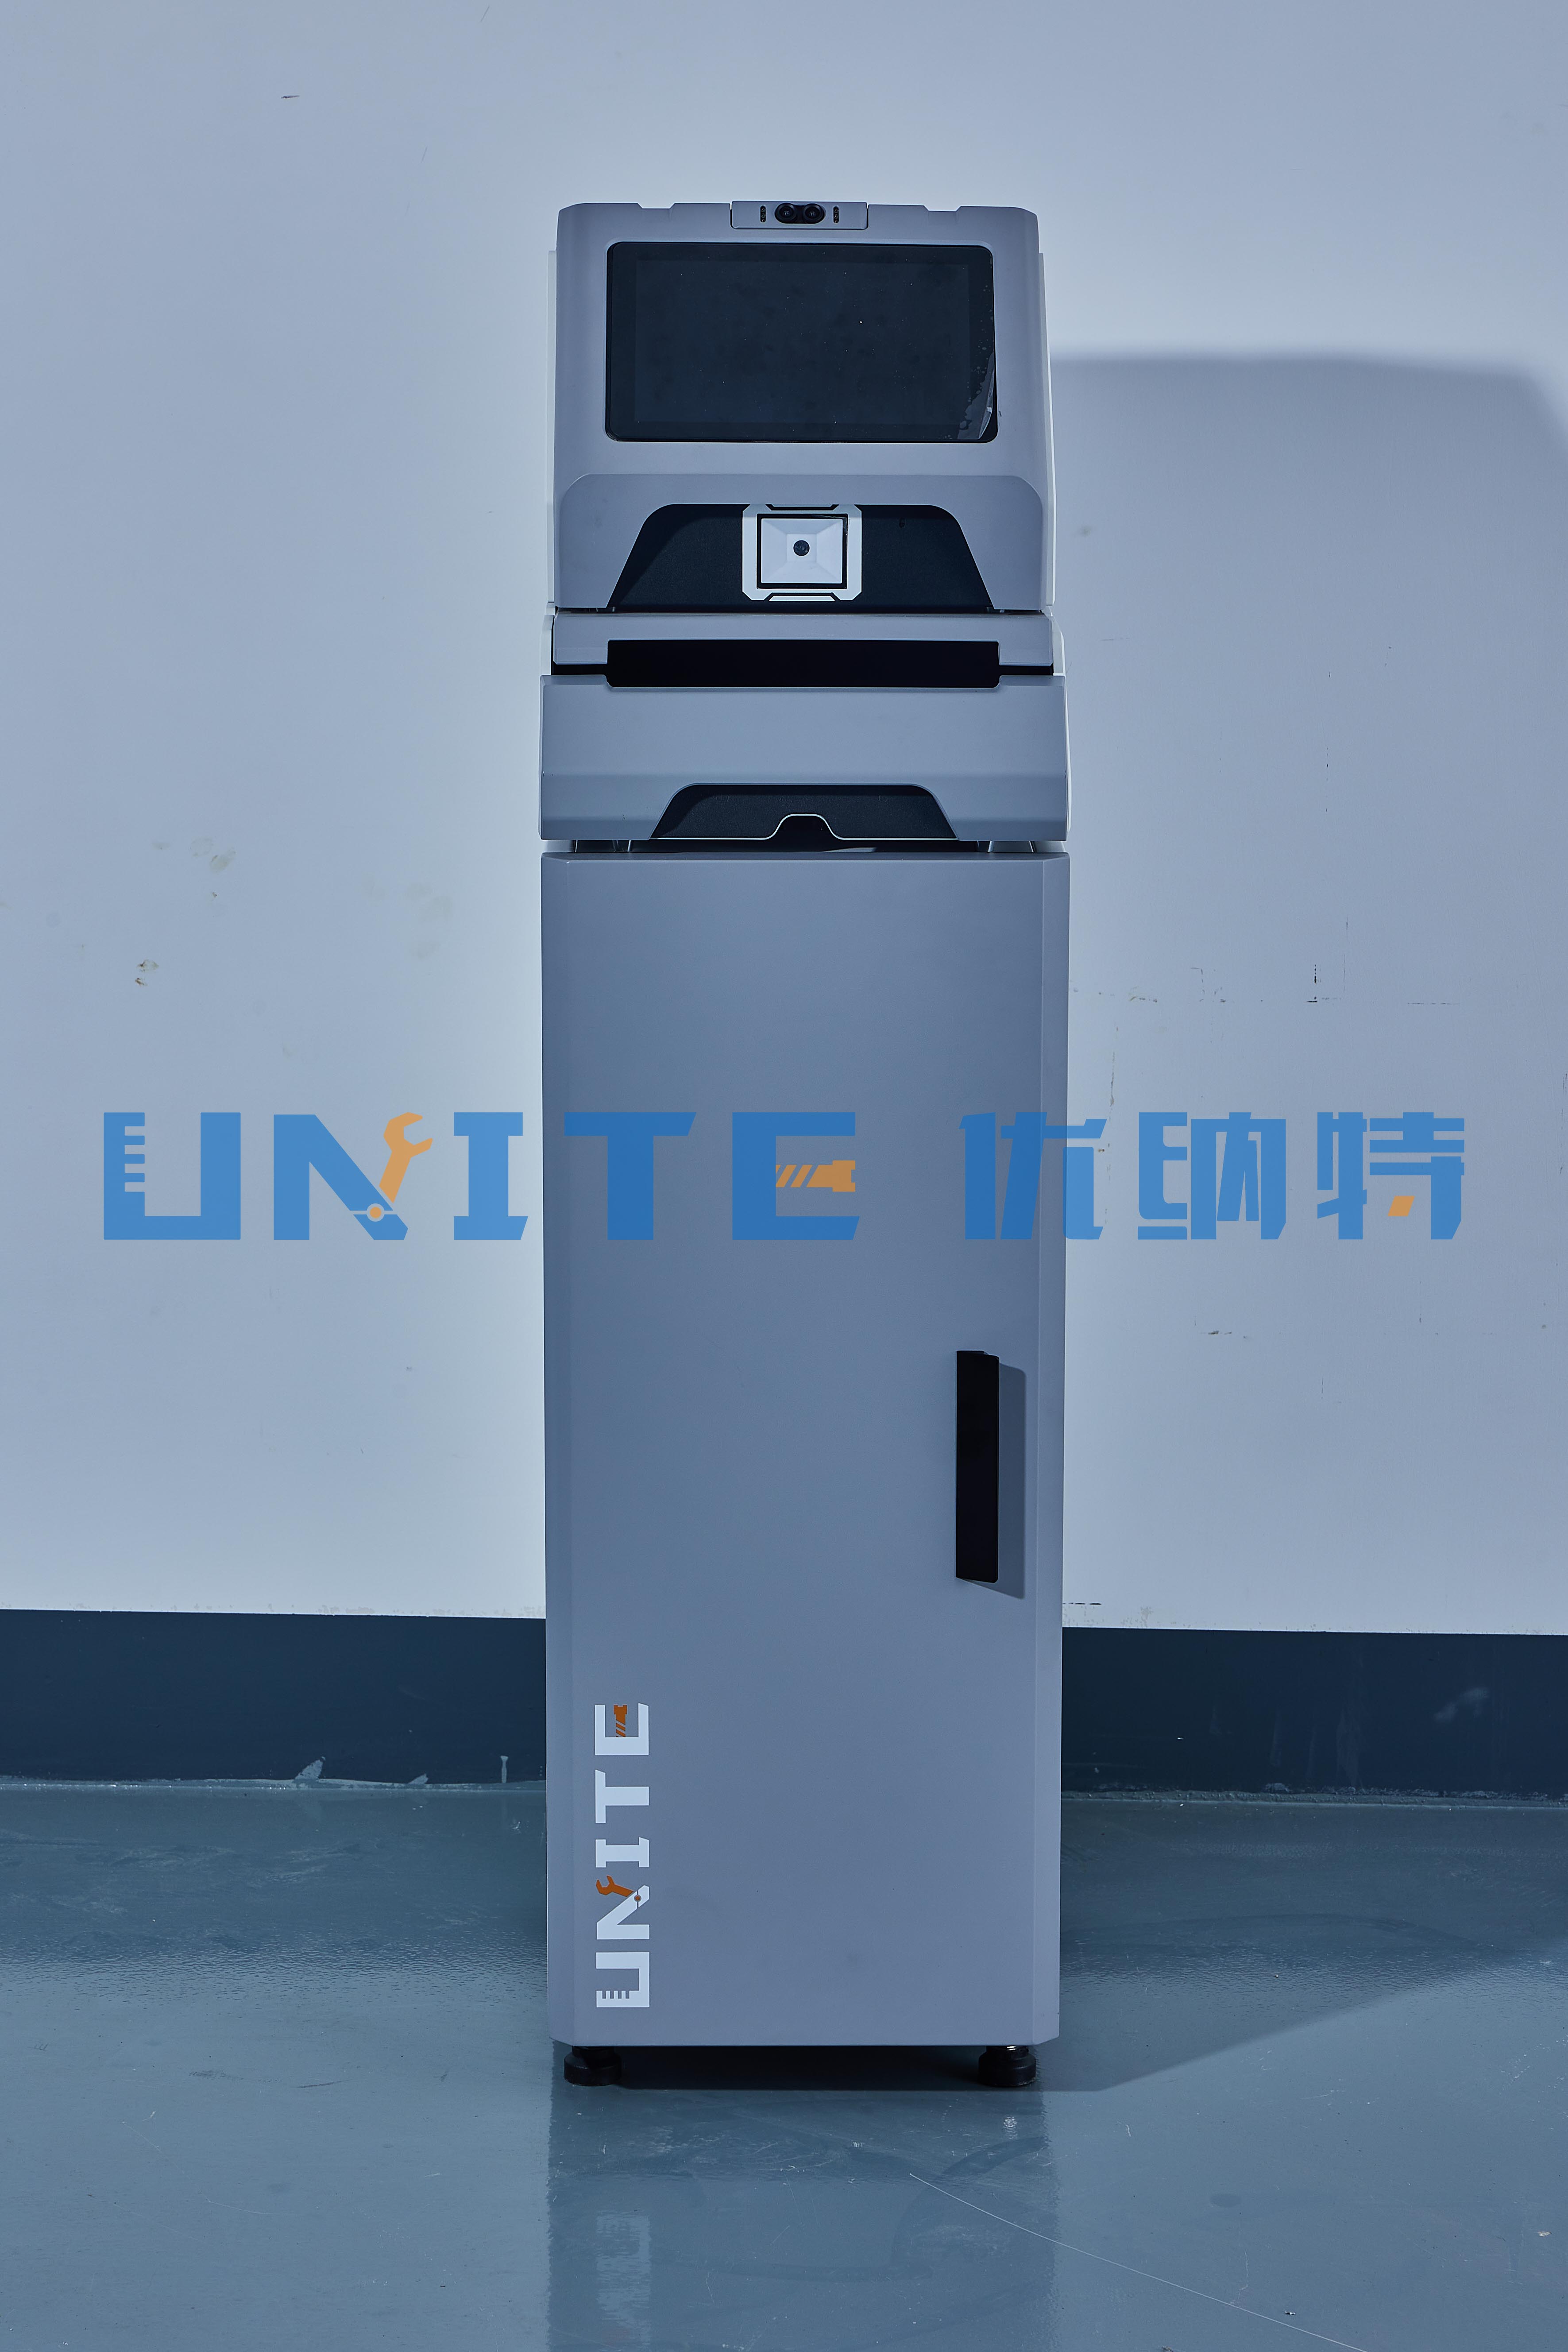 Unite Usample T-RKZ02/L Matrix IOT Combined Control Platform with Built-in Balance and Large Storage Space